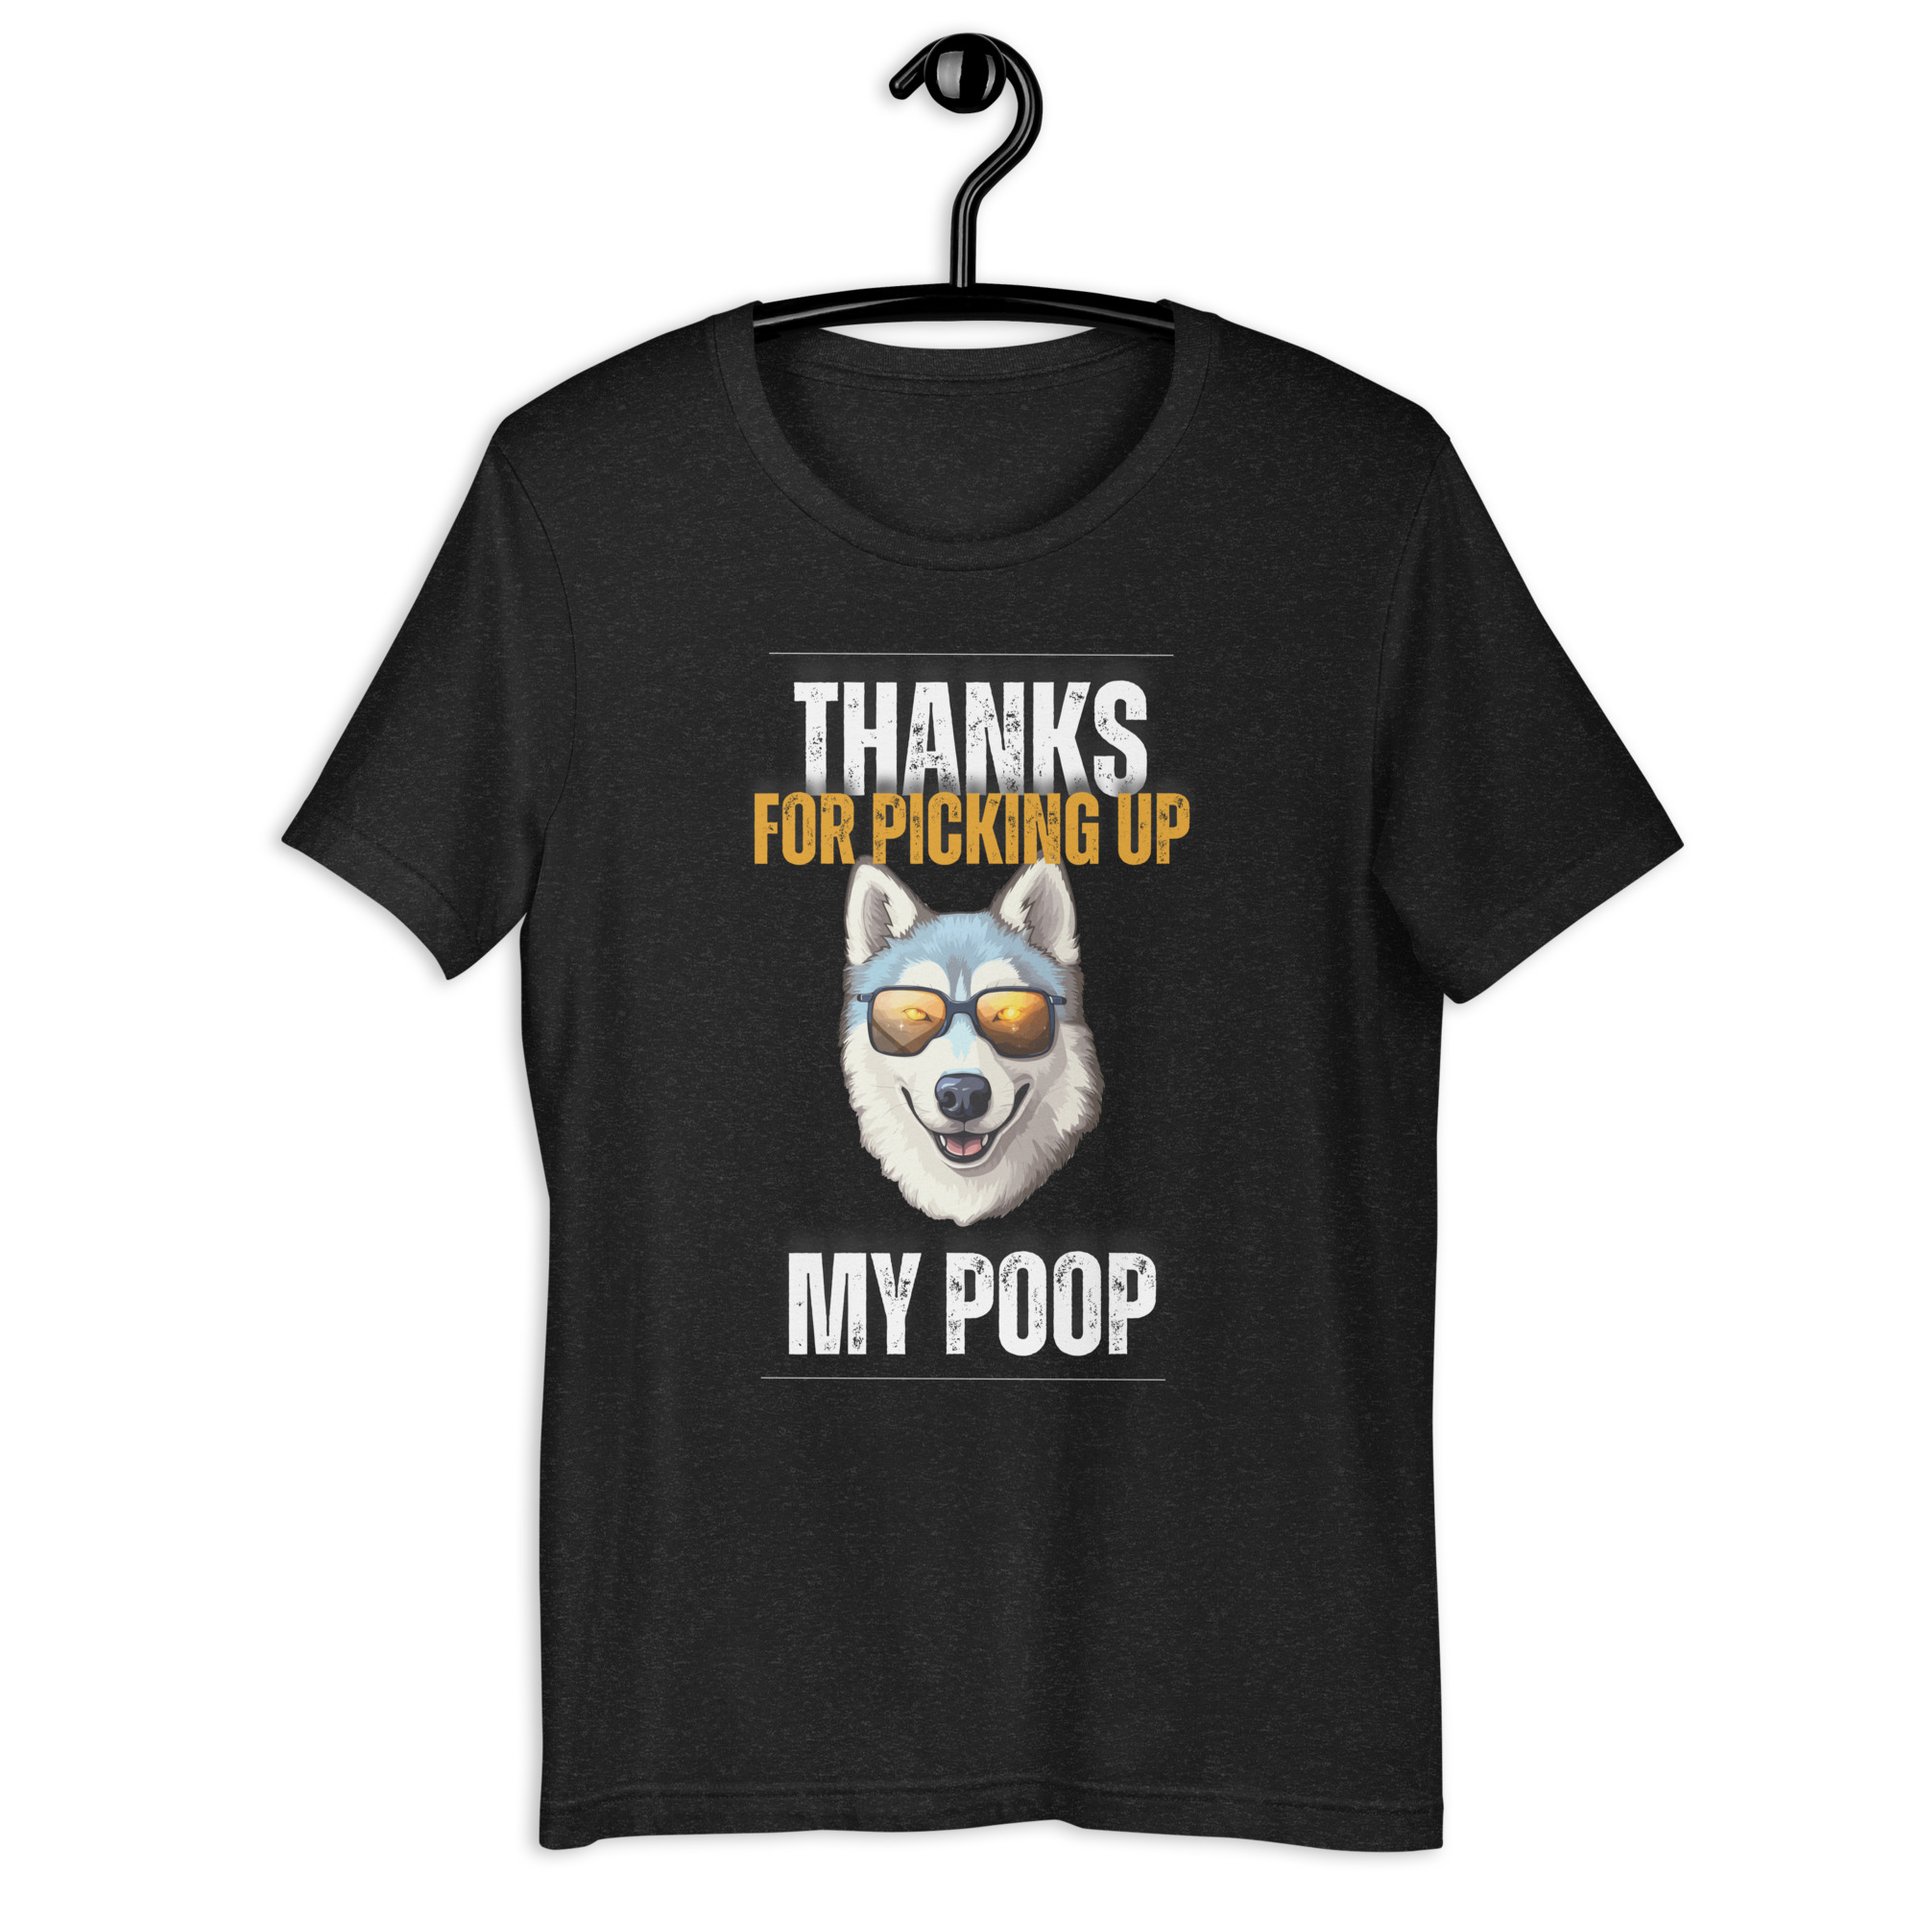 Thanks For Picking Up My POOP Funny Huskies Unisex T-Shirt. Black Heather